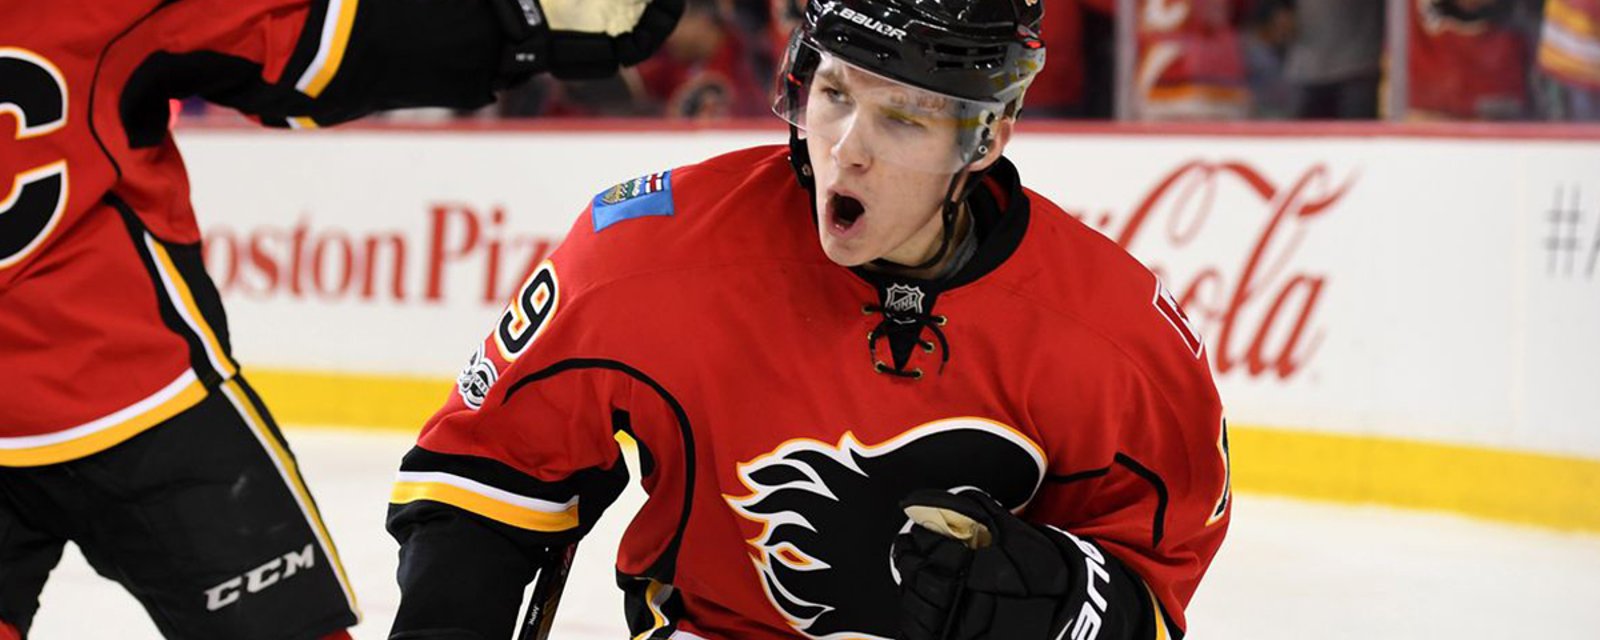 Matthews has surprising comments for Flames’ Tkachuk